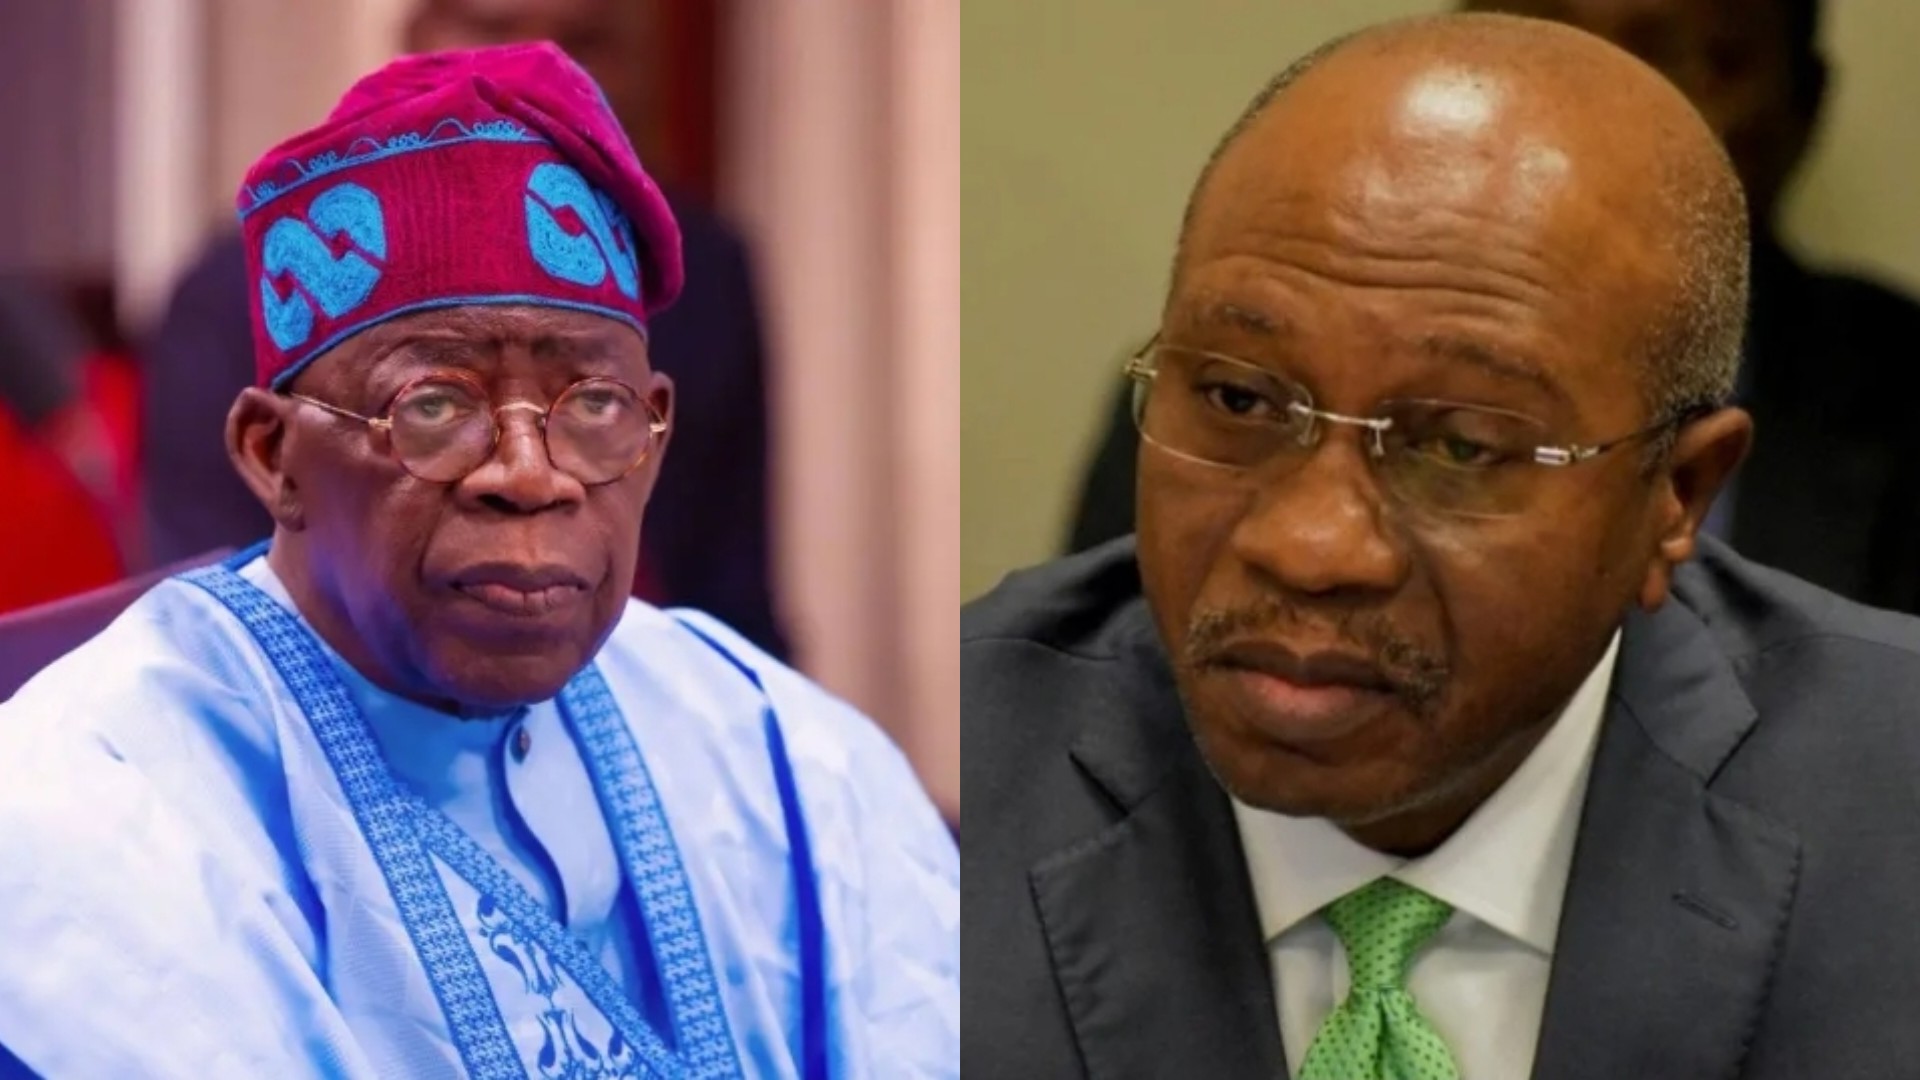 FG To Convict Ex-CBN Gov, Emefiele Over Suspected Economic Sabotage Charges